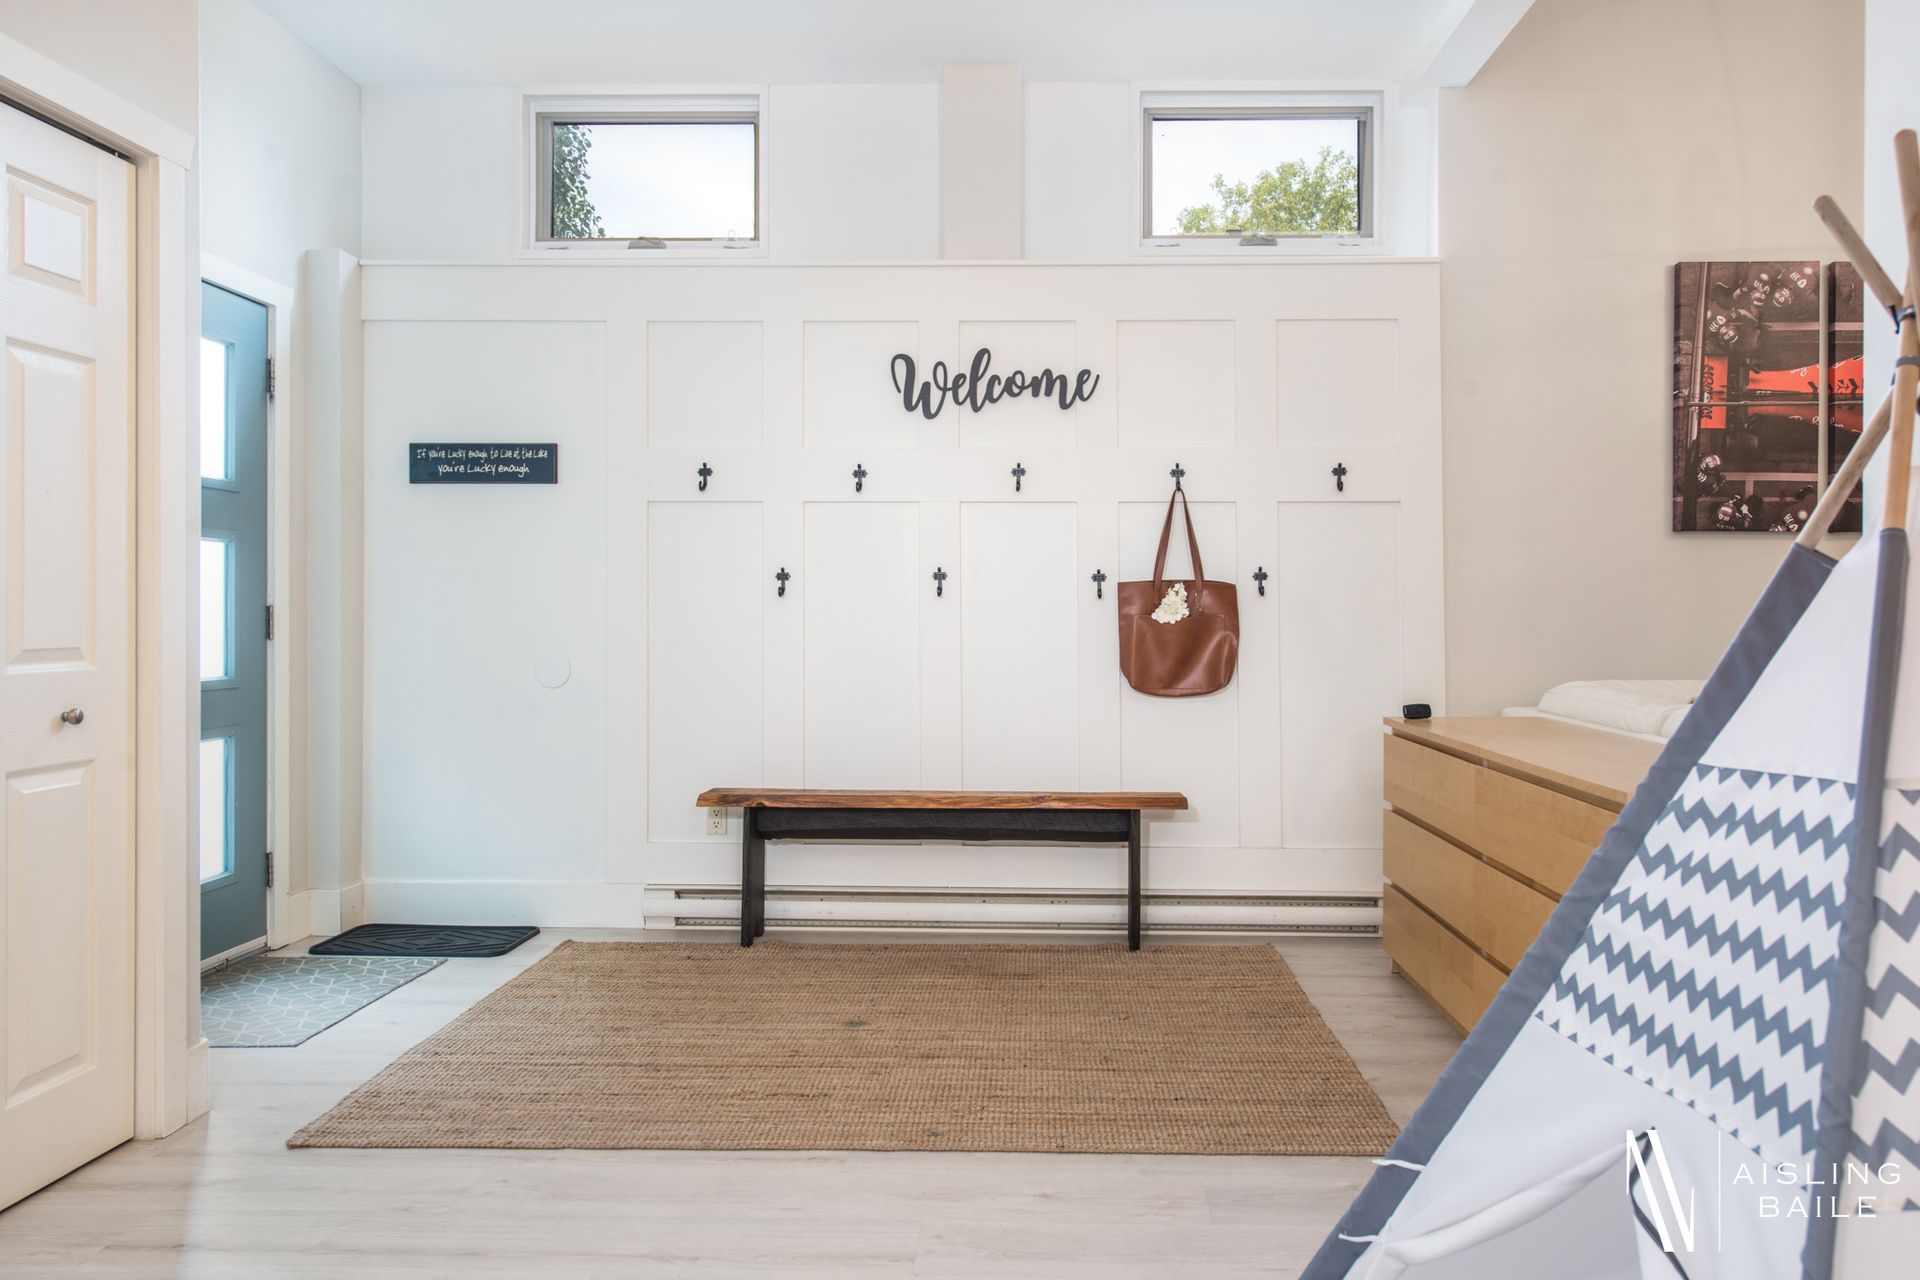 Entrance of the Central Elegance, an Invermere BC Vacation Rental hosted by Aisling Baile Property Management.